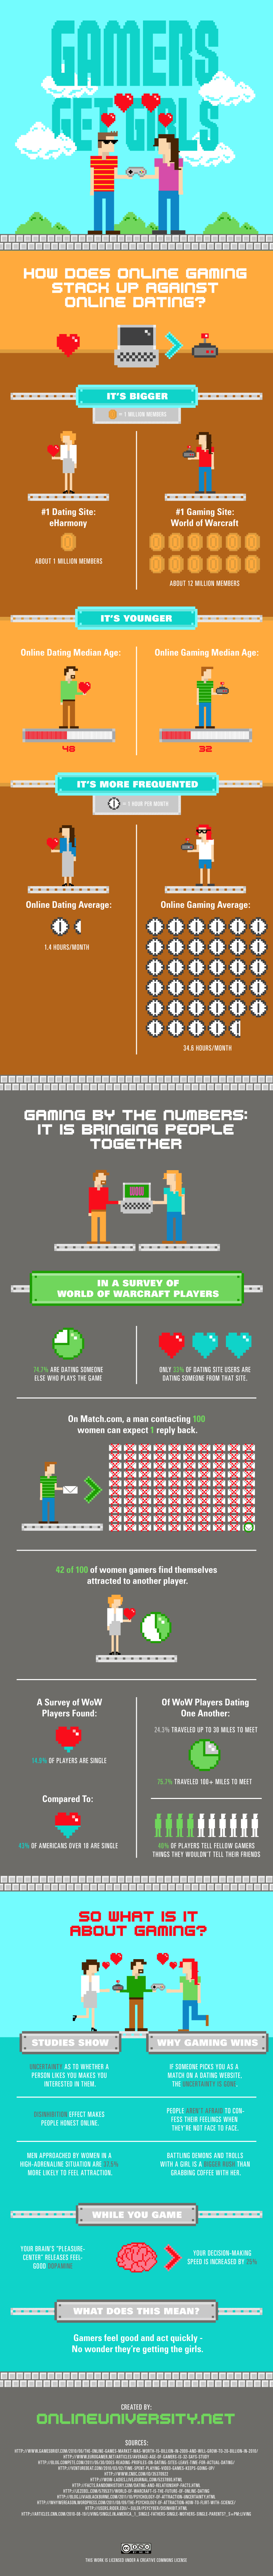 Gamers Get Girls (Or Guys!) [Infographic]